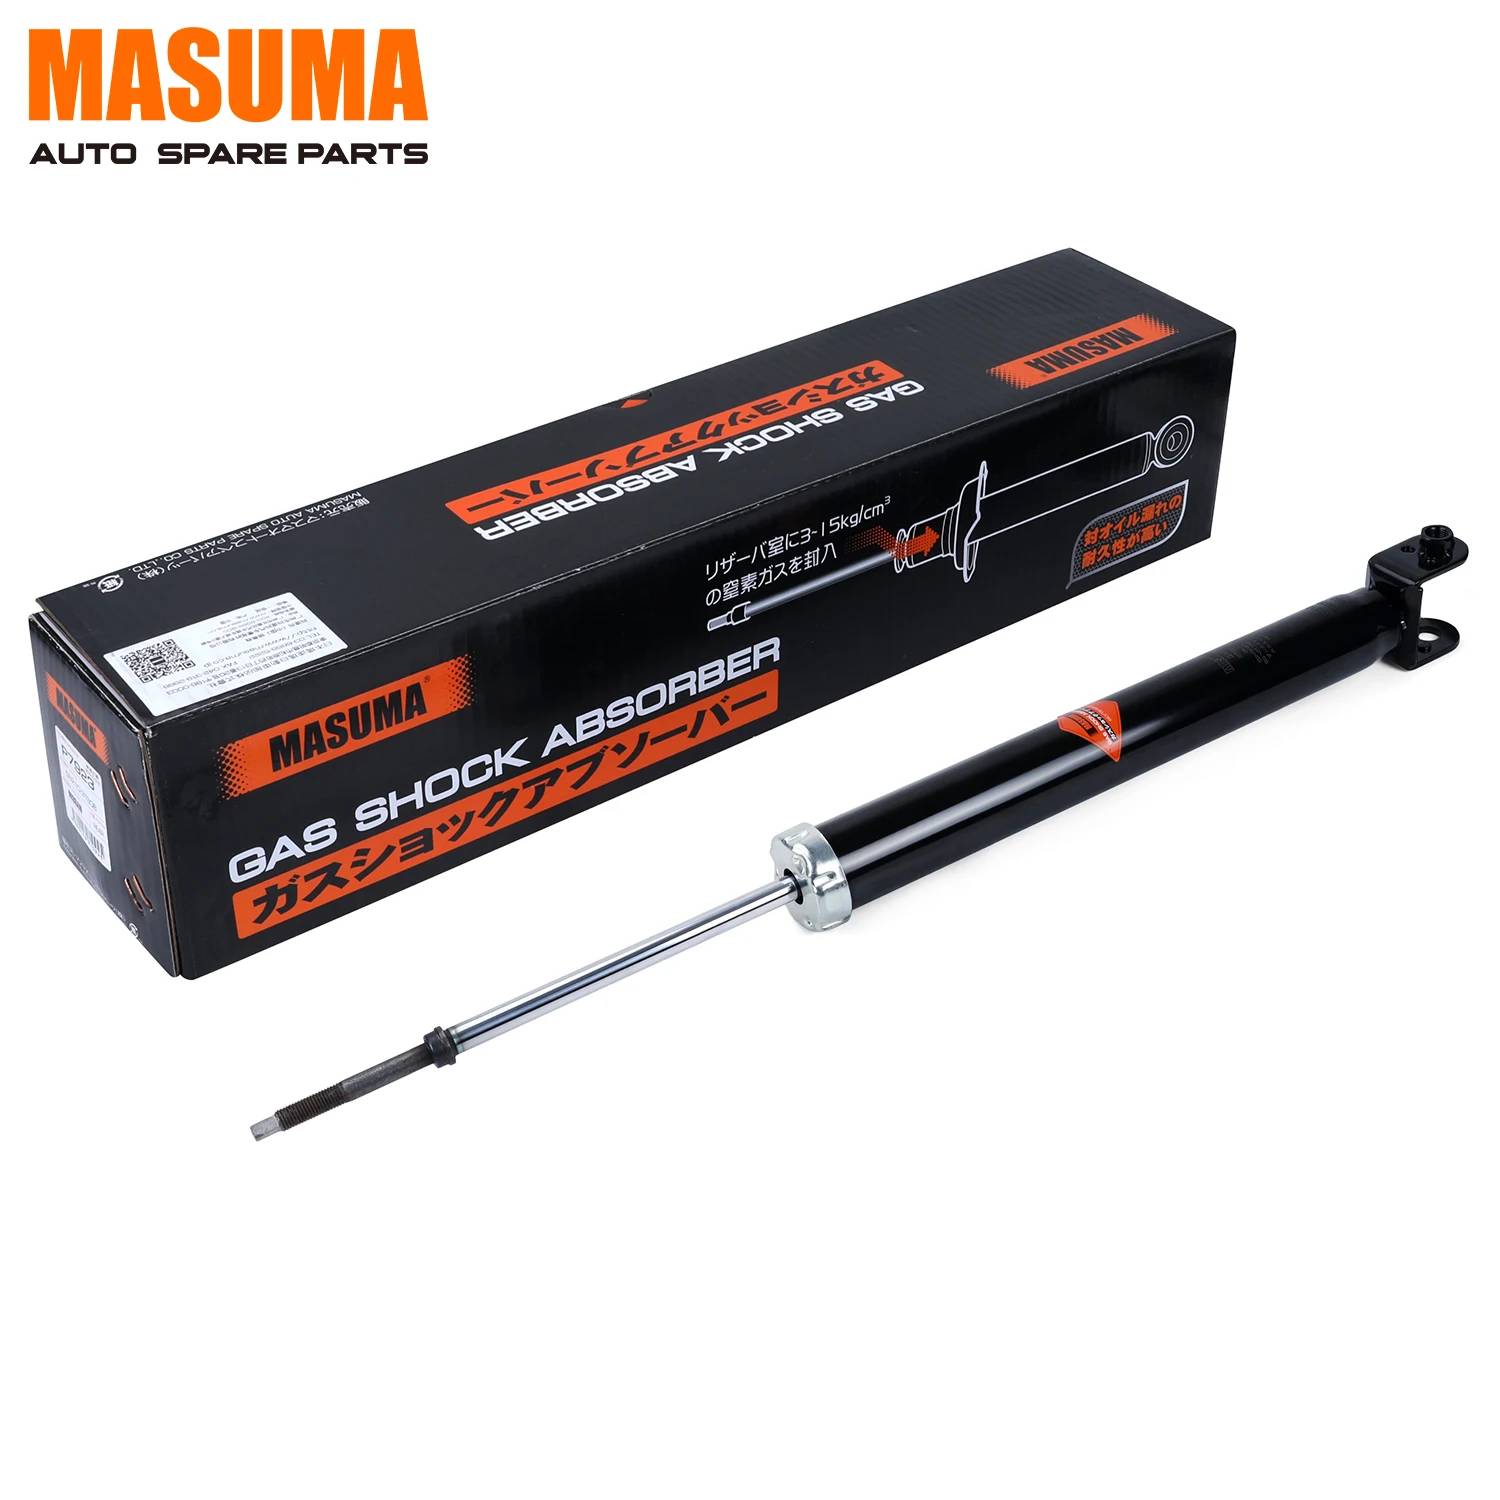 Source P7923 MASUMA Car Accessories Rear Axle Shock Absorber for 